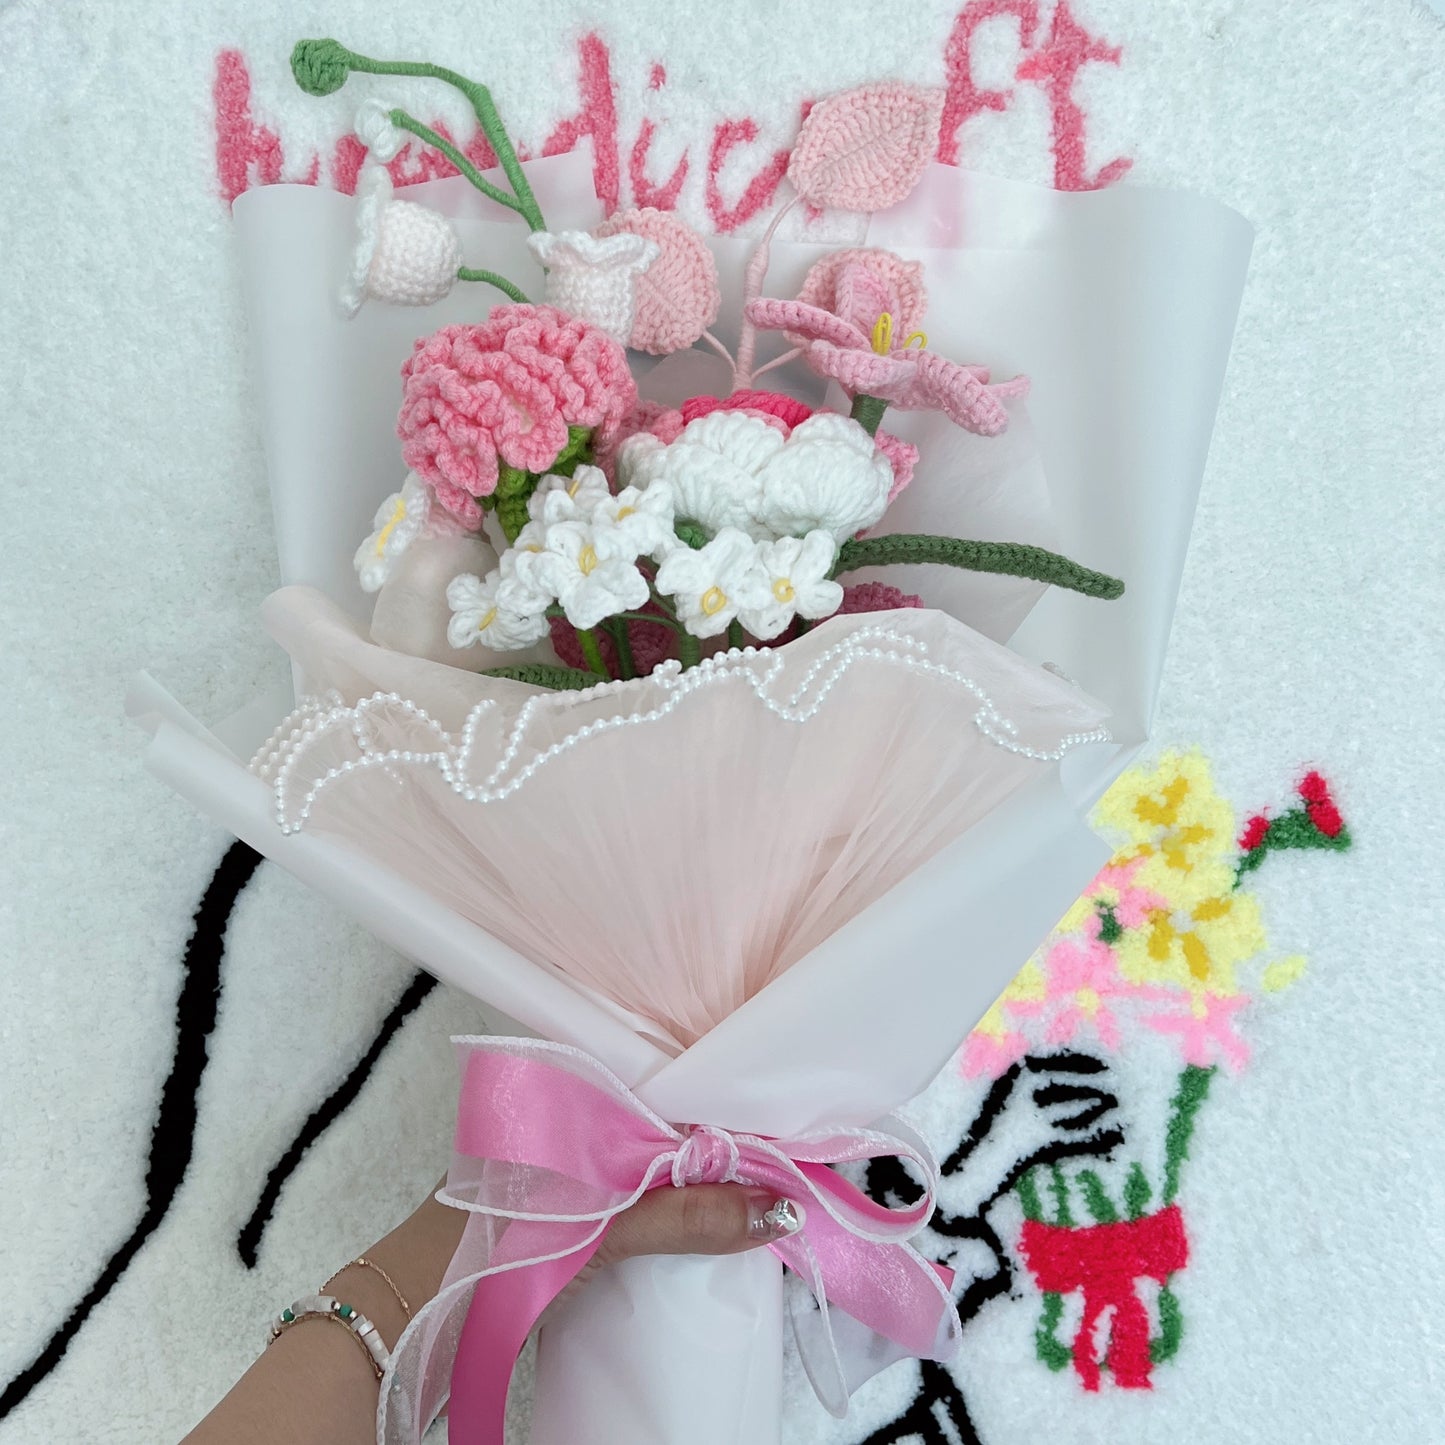 thankful for you - pink & white crochet flower bouquet🌷